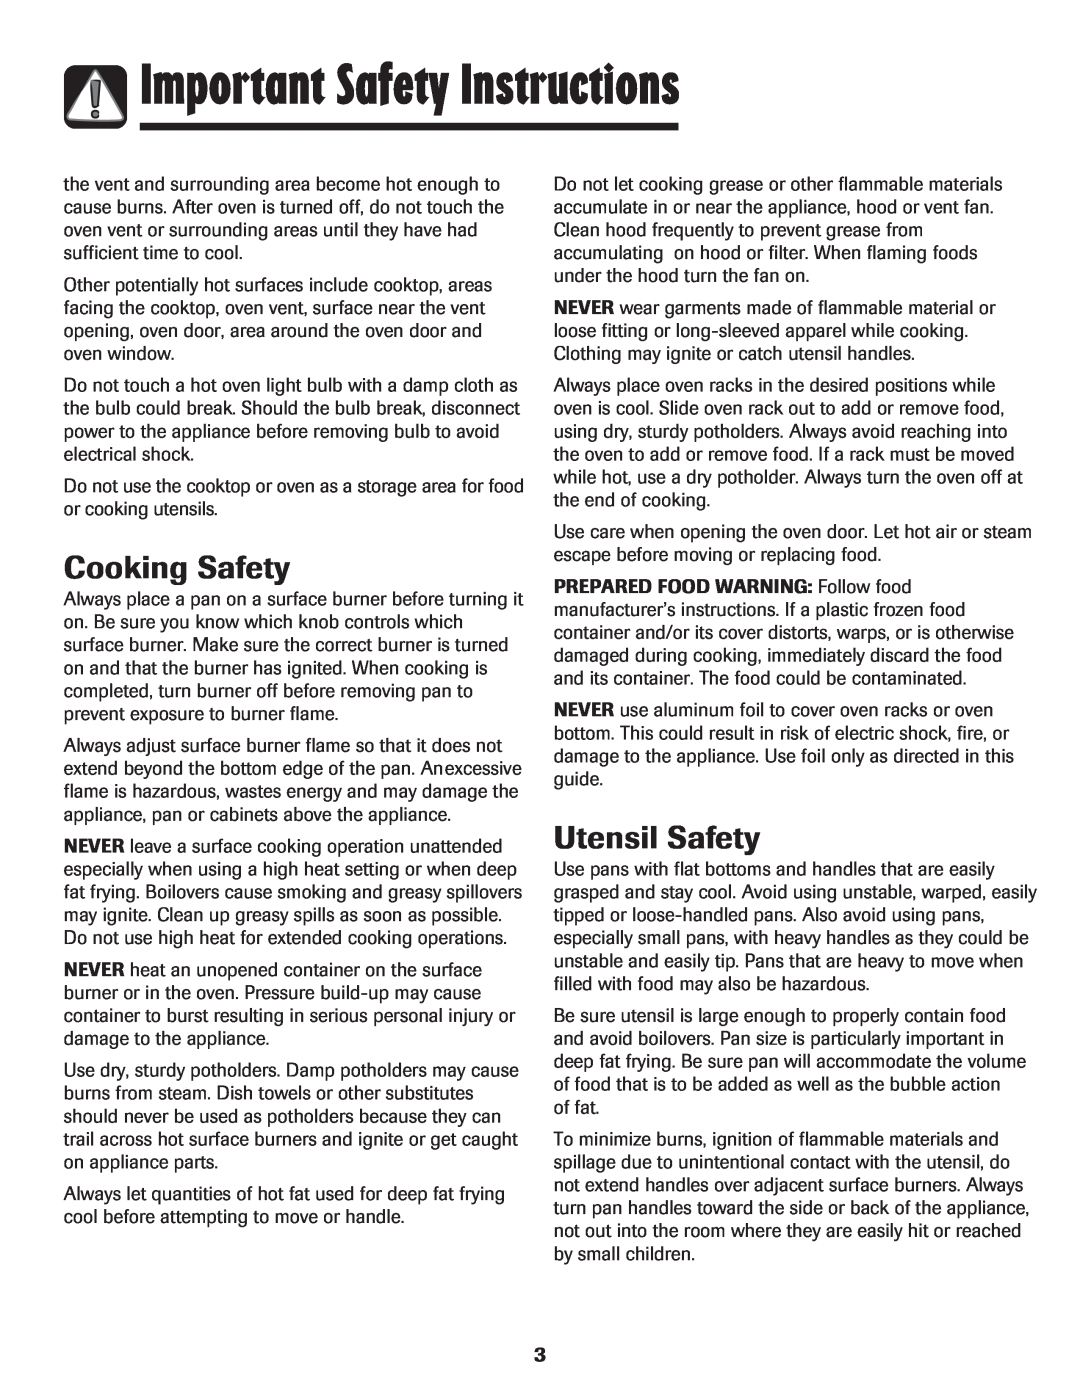 Maytag MGR5775QDW manual Cooking Safety, Utensil Safety, Important Safety Instructions 